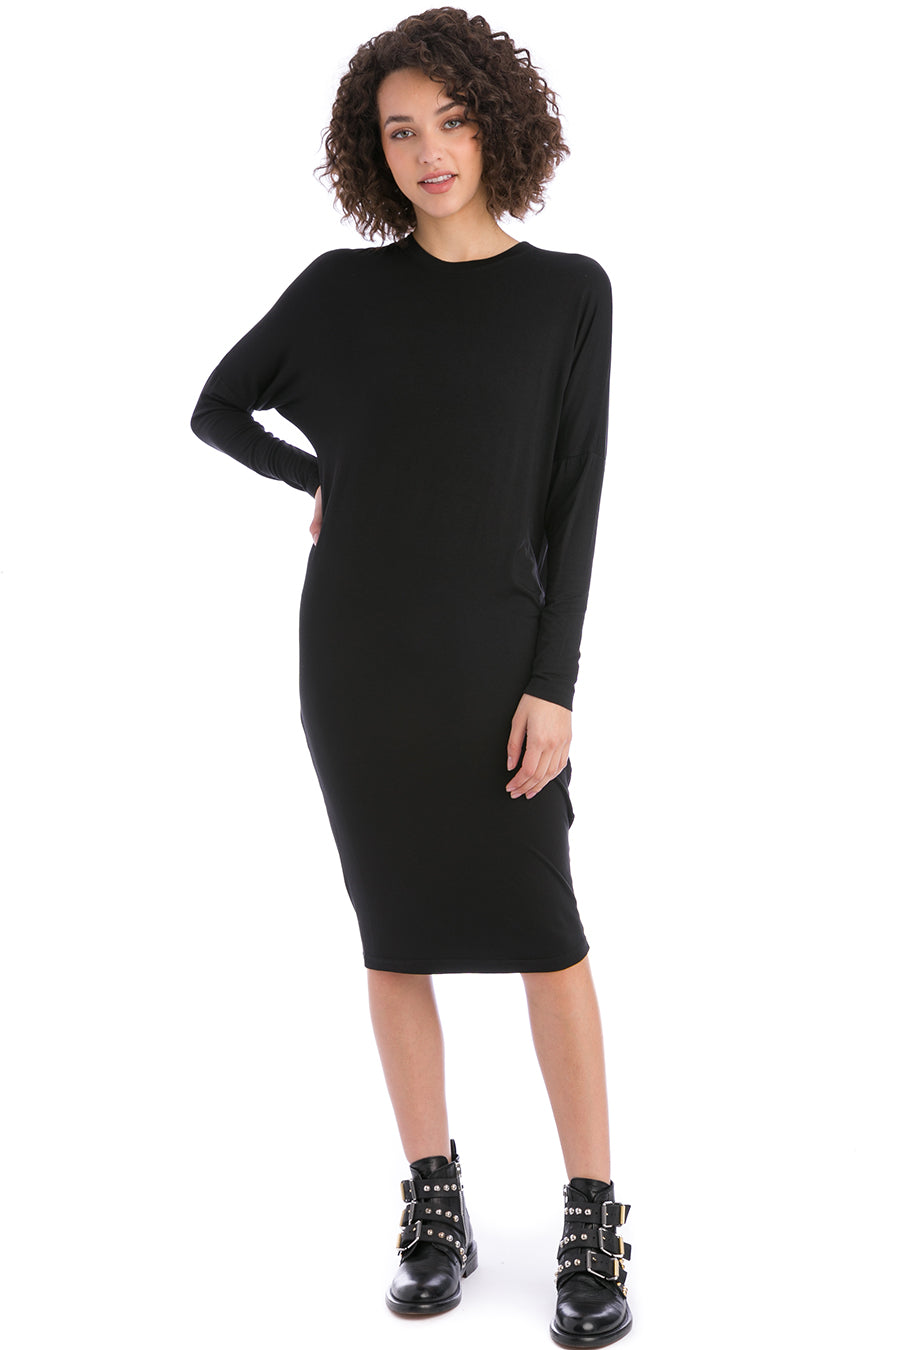 Hard Tail Forever Long Sleeve Slouchy Dress - Black - M